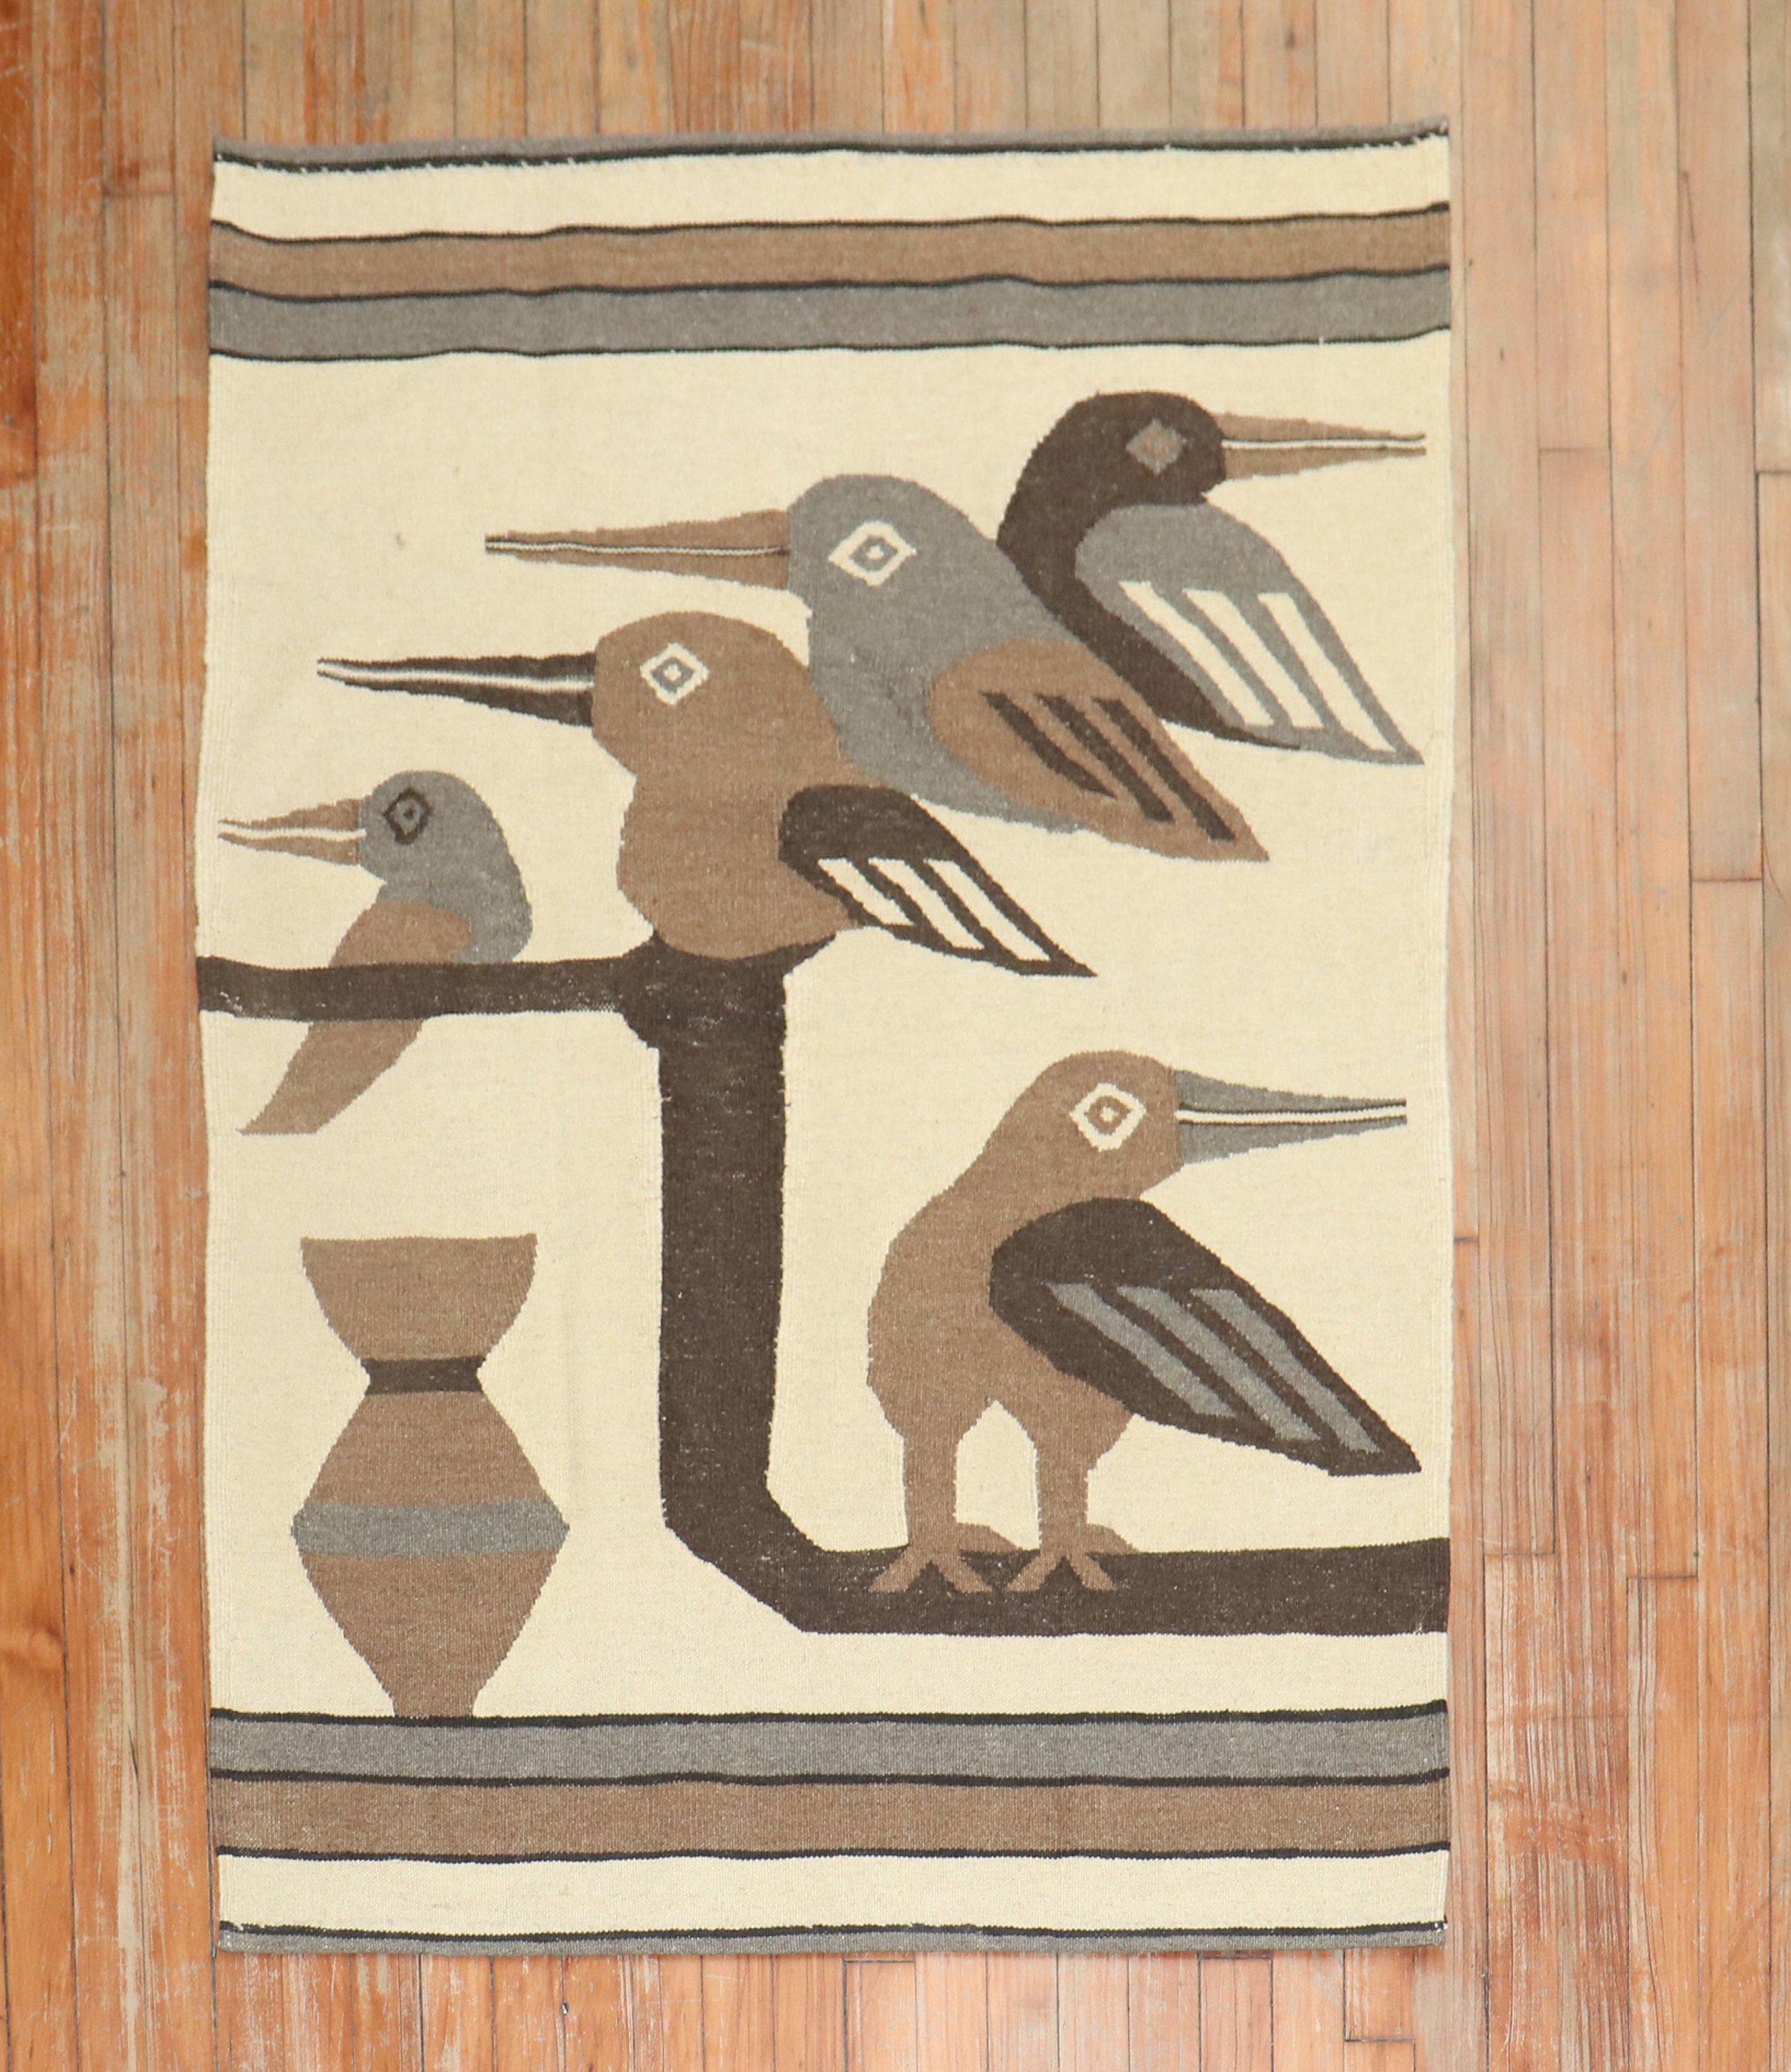 Scatter size Persian Kilim from the late 20th century with a flurry of pigeons in beige, gray, and brown

This was originally belonging to a private Persian collector who requested to make a custom collection of flat-weaves with quirky themes and